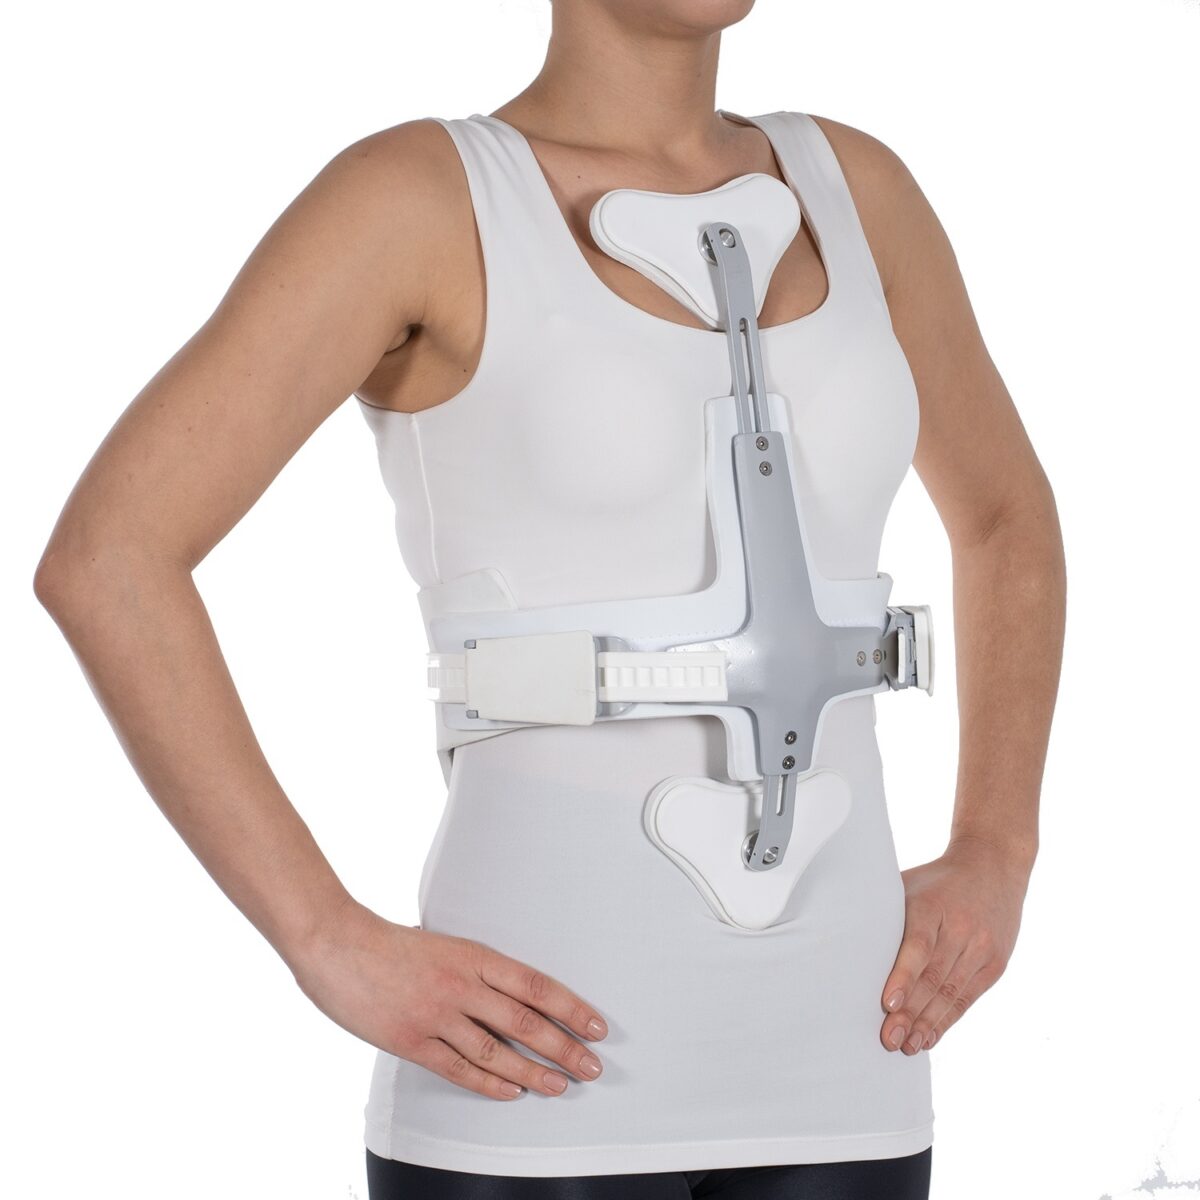 wingmed orthopedic equipments W449 hiperextension corset 3 points 65